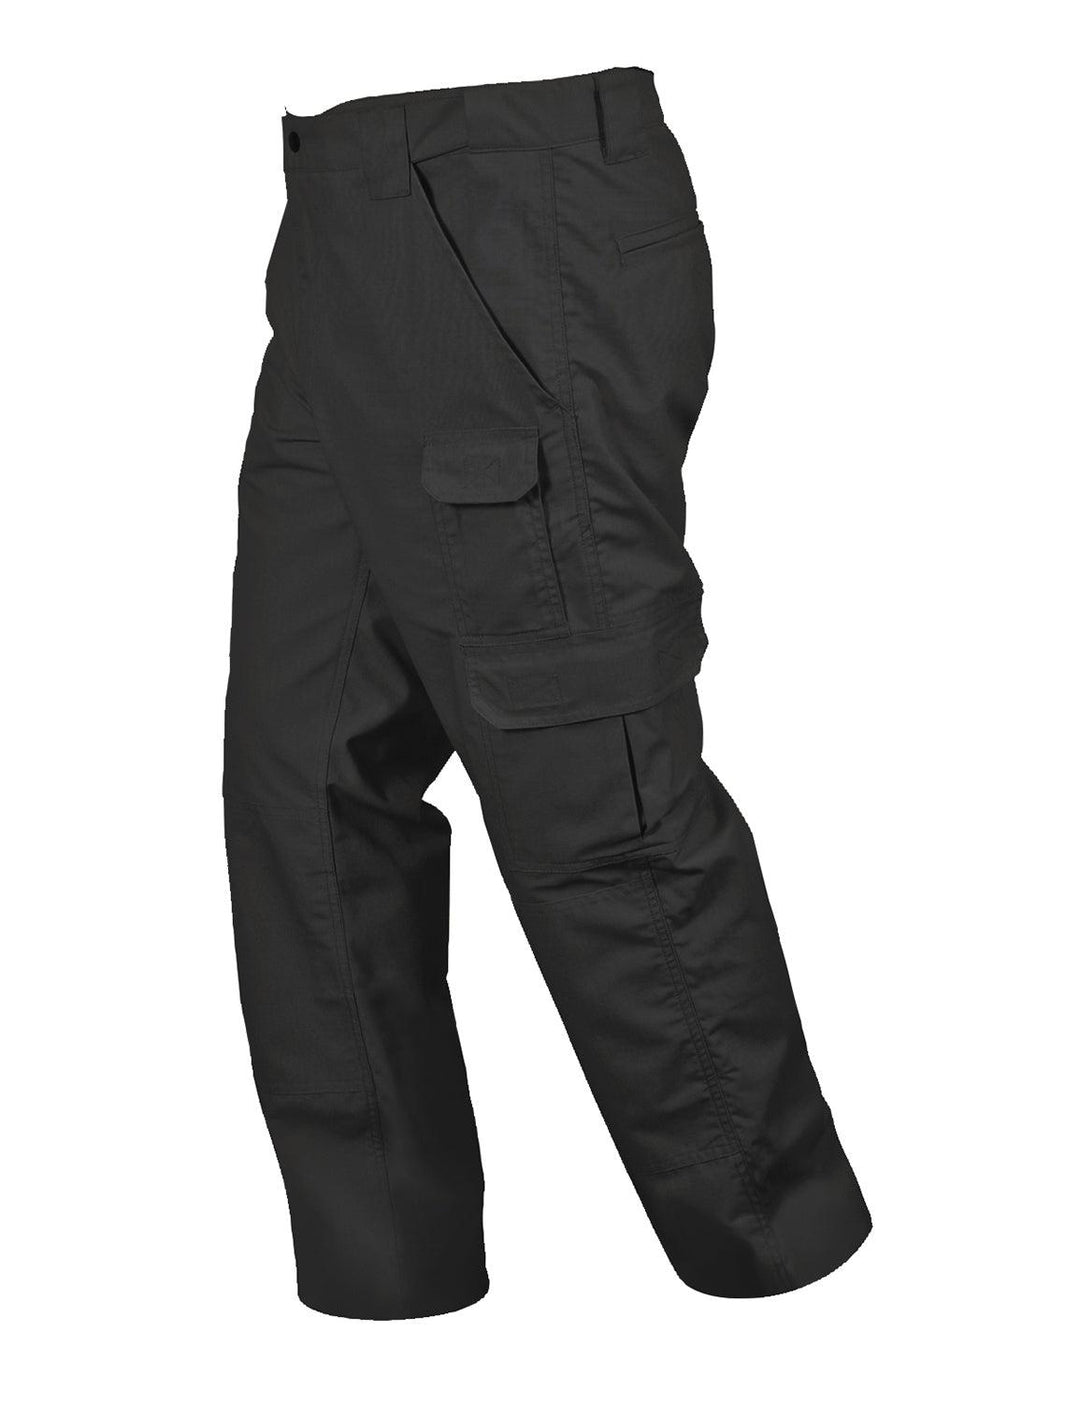 Mens Tactical Duty Pants by Rothco - Legendary USA